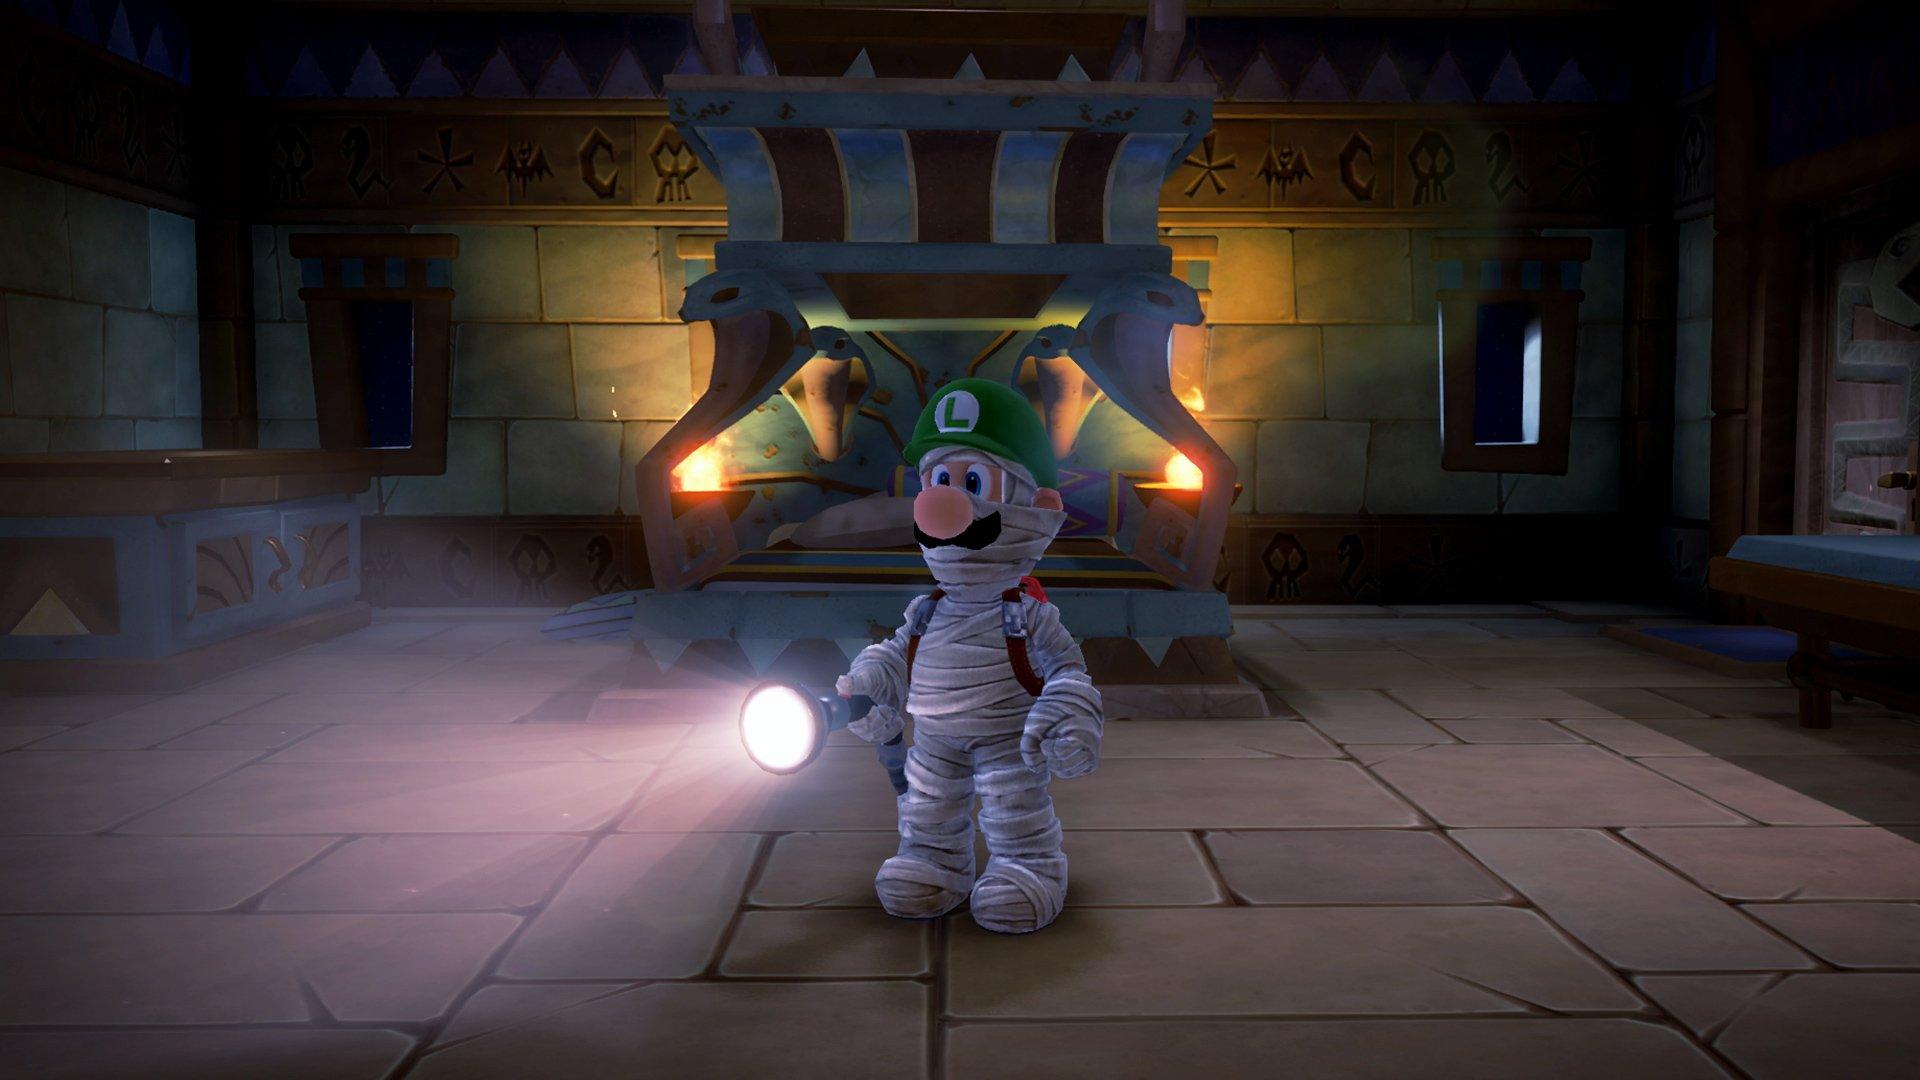 Buy now – Luigi's Mansion™ 3 for the Nintendo Switch™ system